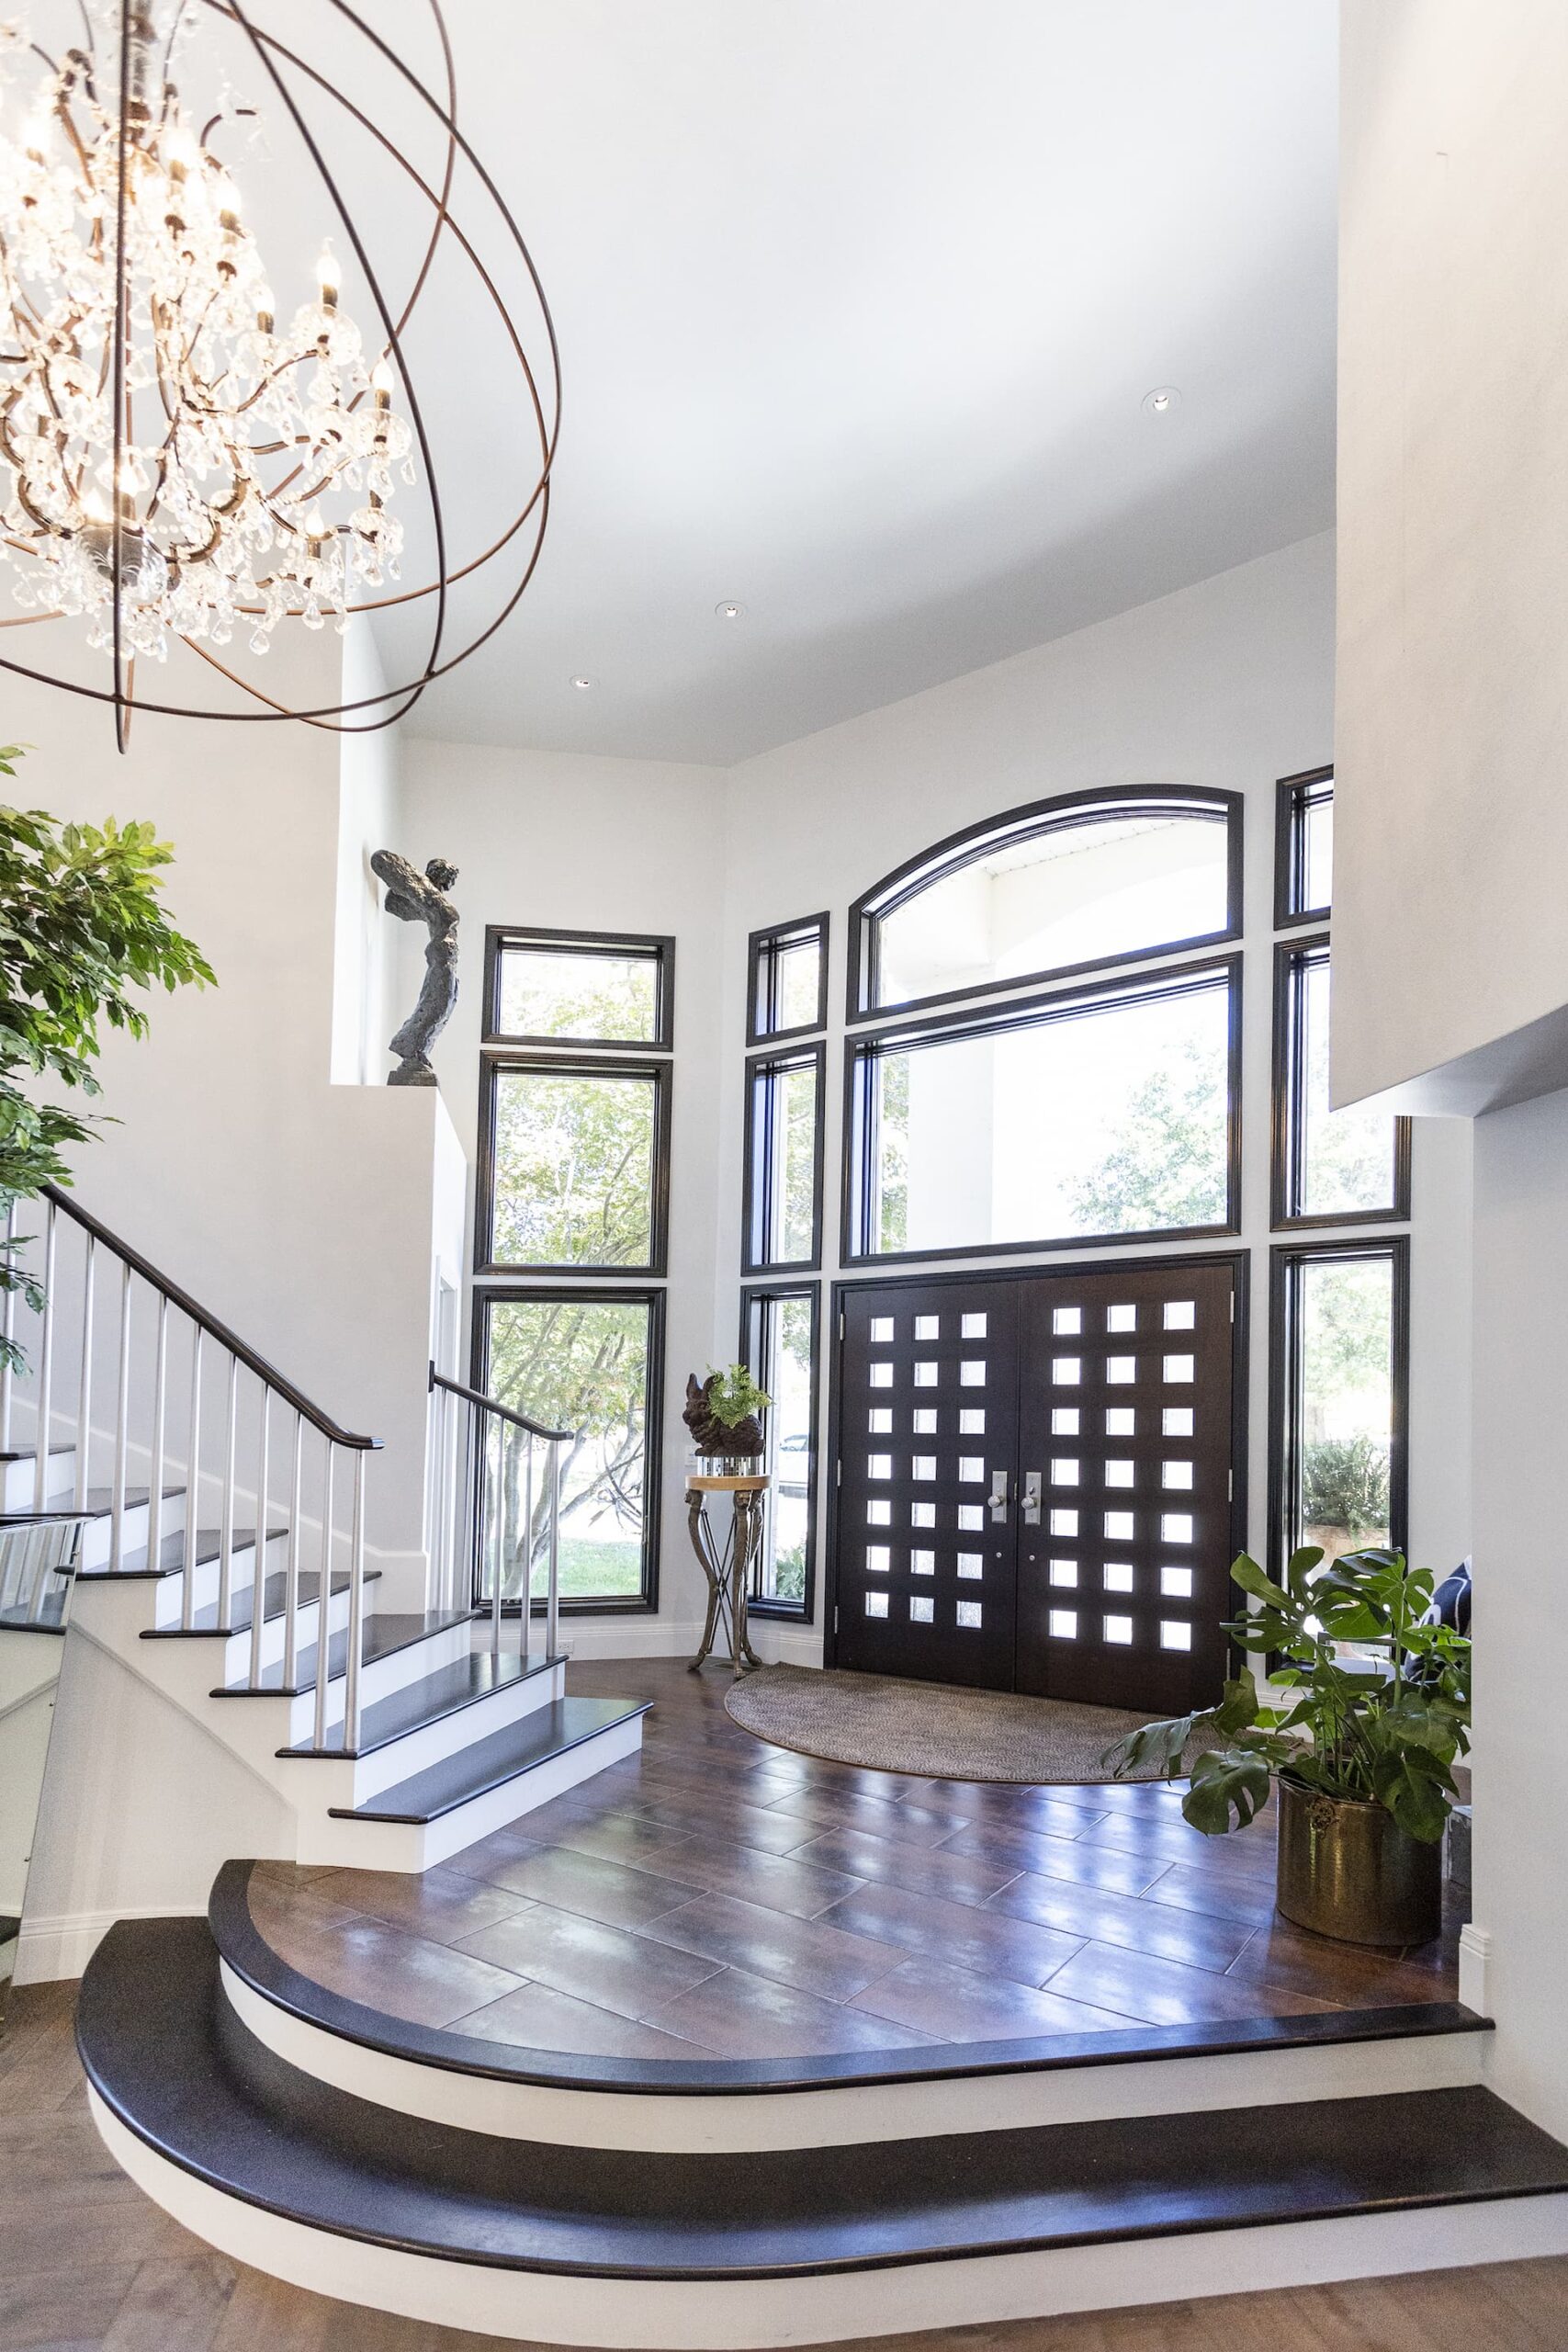 A remodeled entry way of a luxurious home